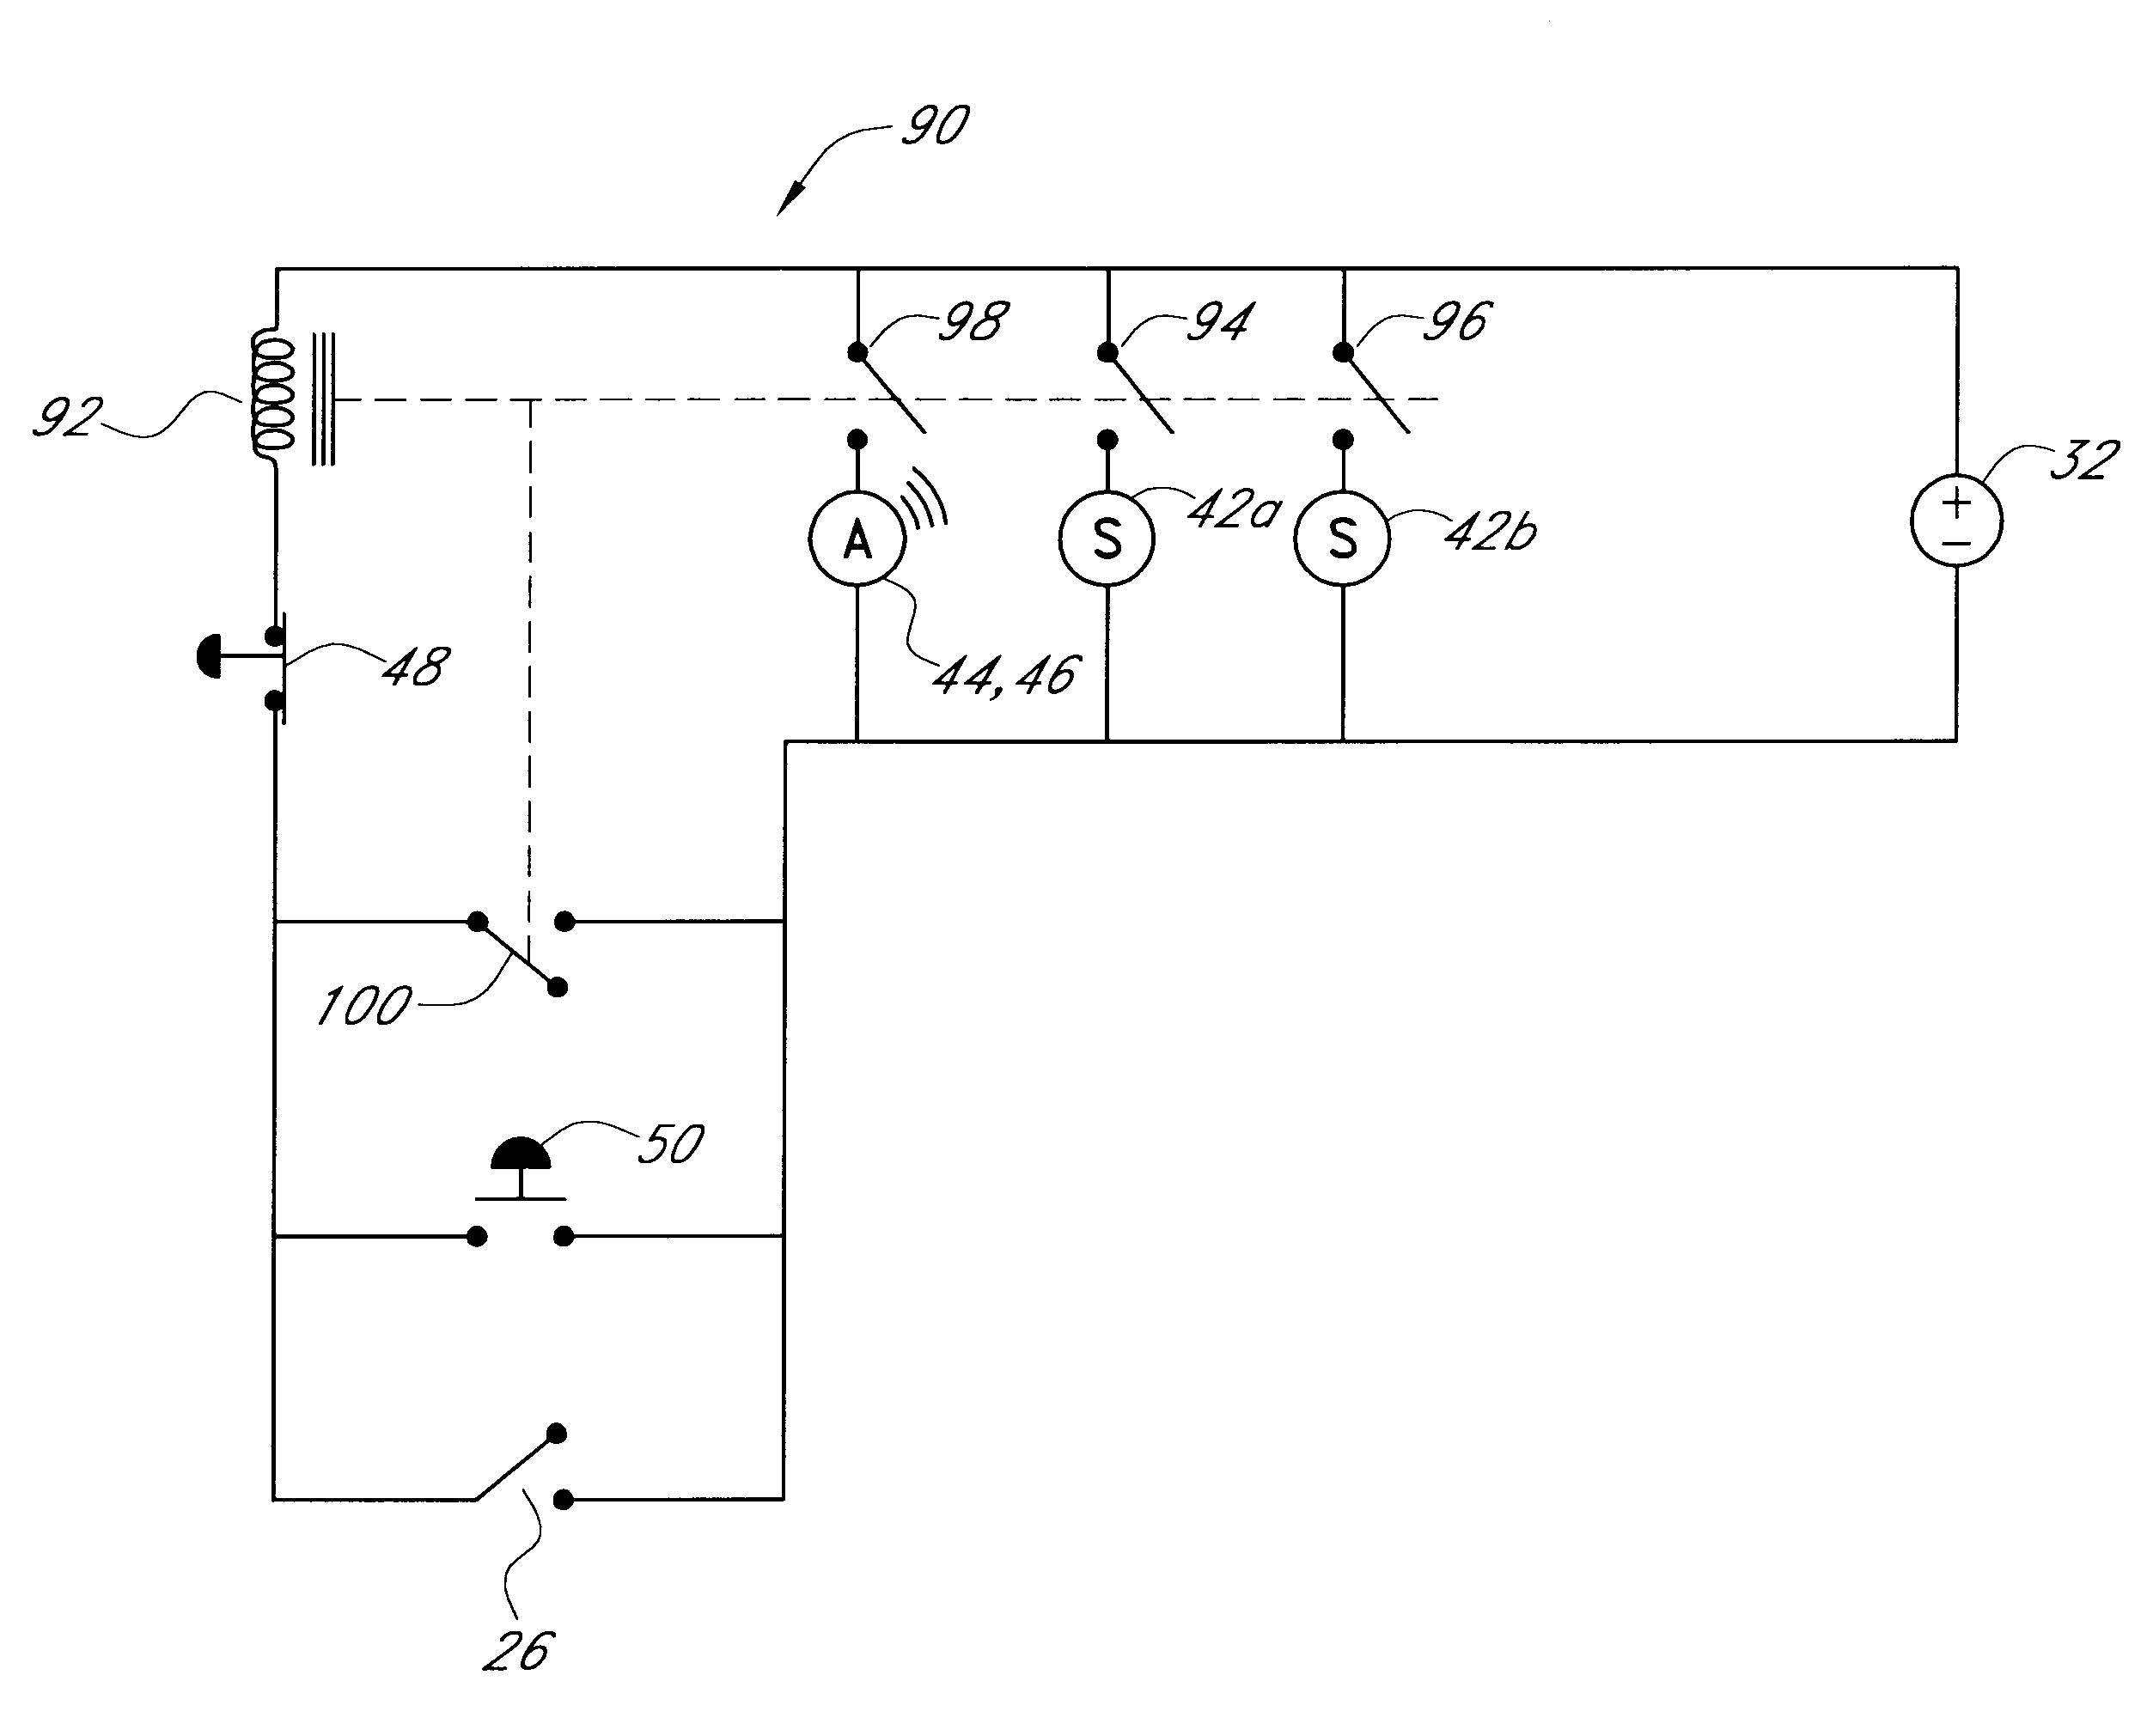 Water leak detection and correction device